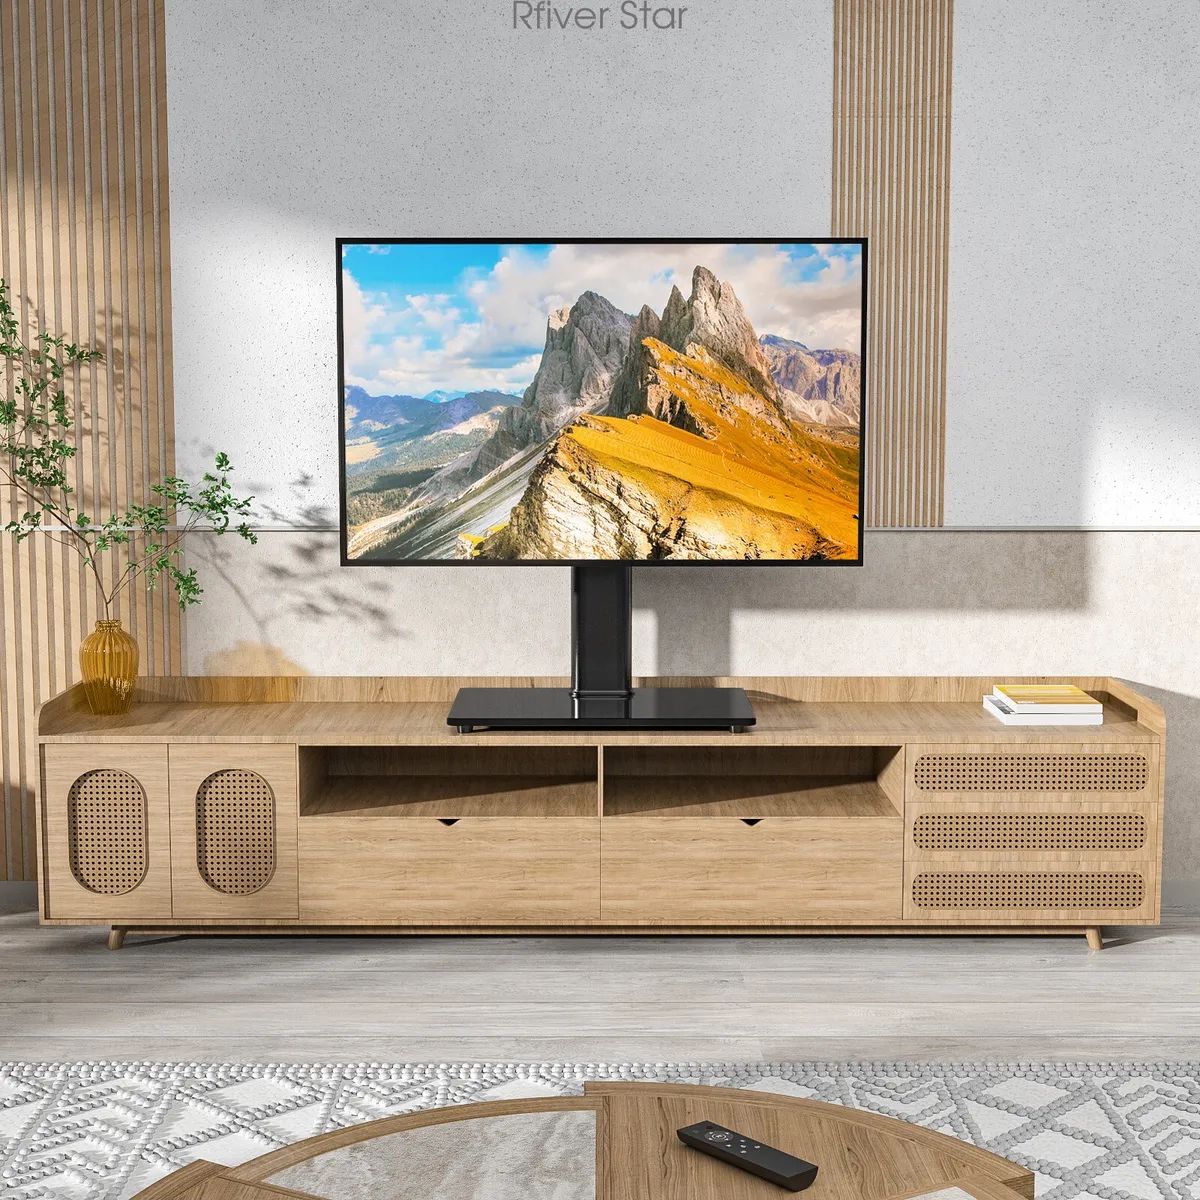 Universal Swivel Tabletop Tv Stand For Flat Screens 23 24 26 32 39 40 43  Inch Tv | Ebay Regarding Universal Tabletop Tv Stands (View 4 of 15)